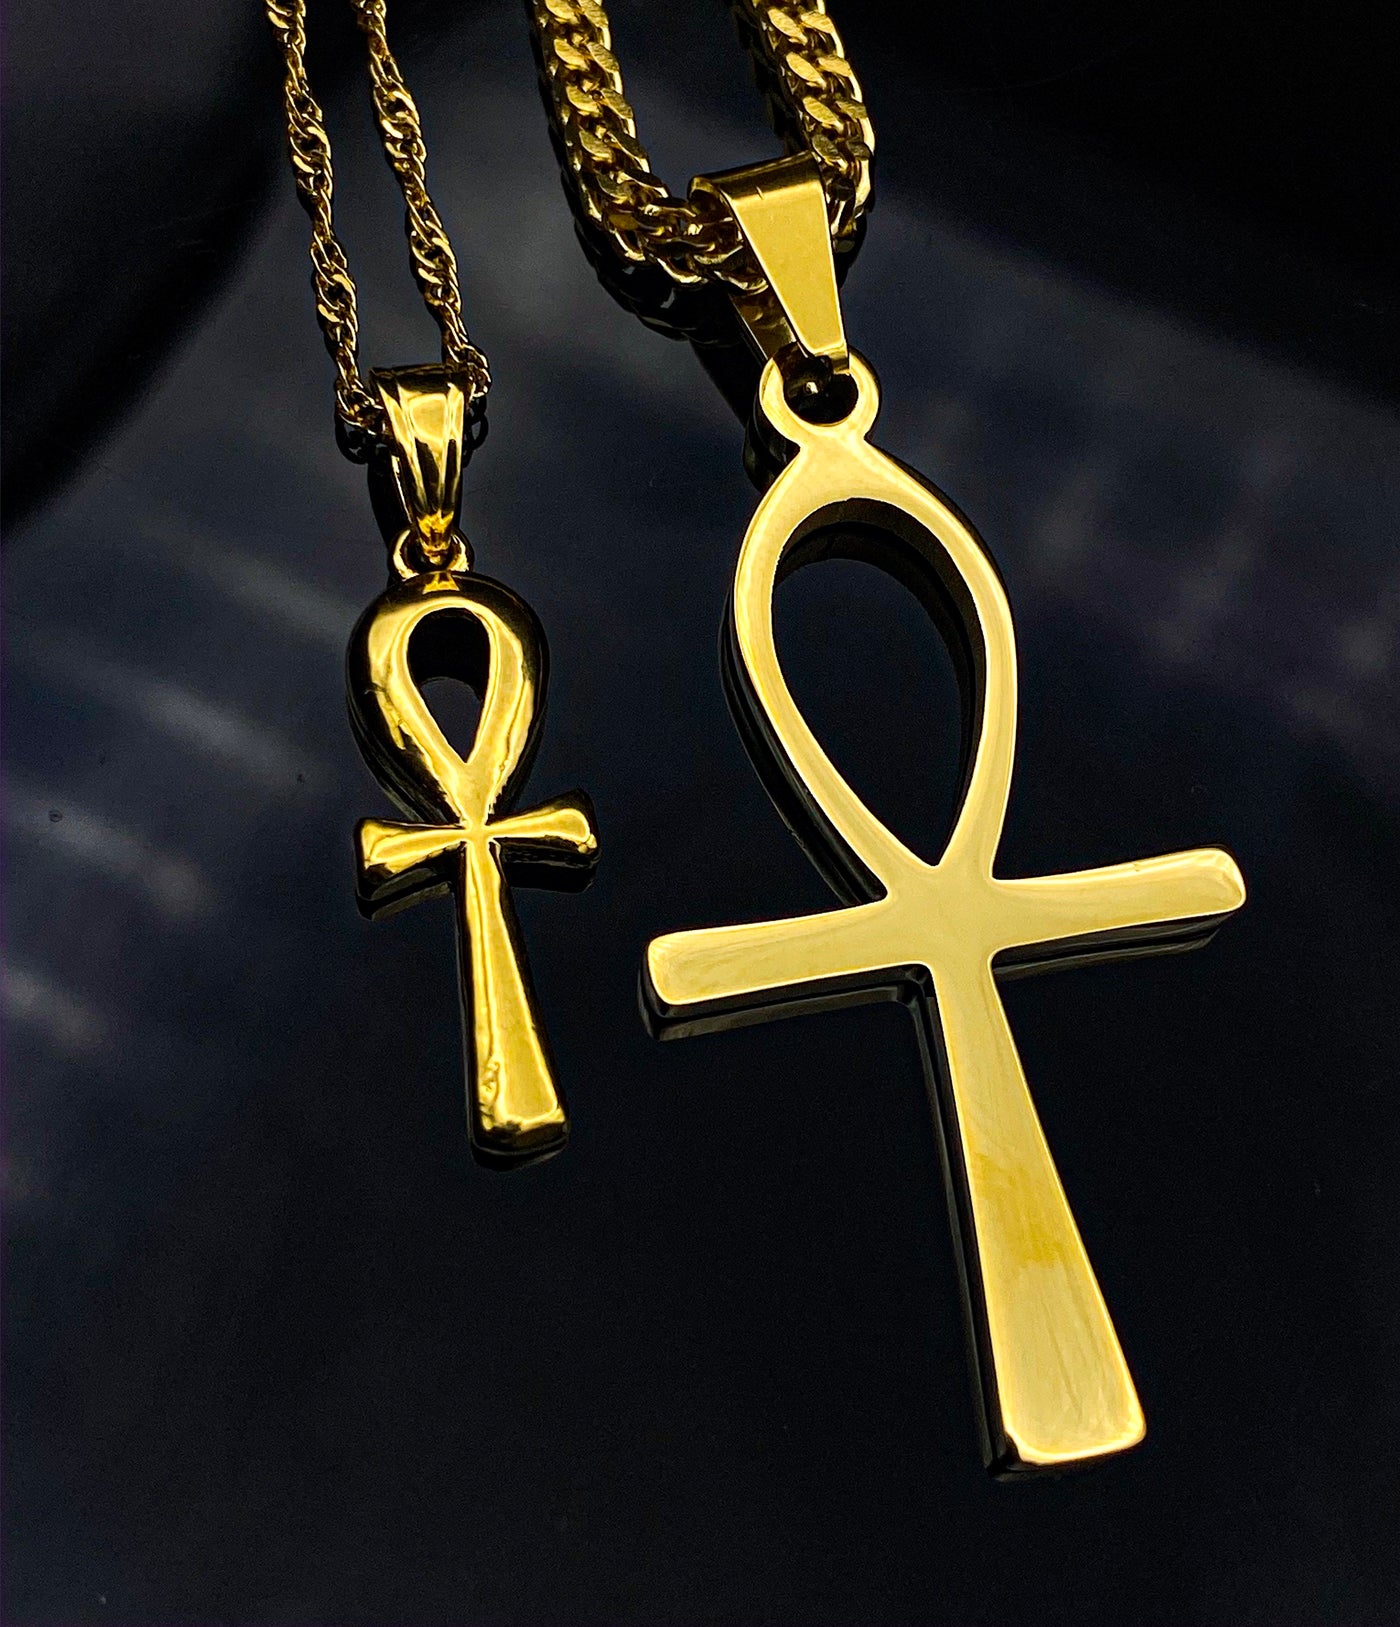 His & Hers ANKH Bundle